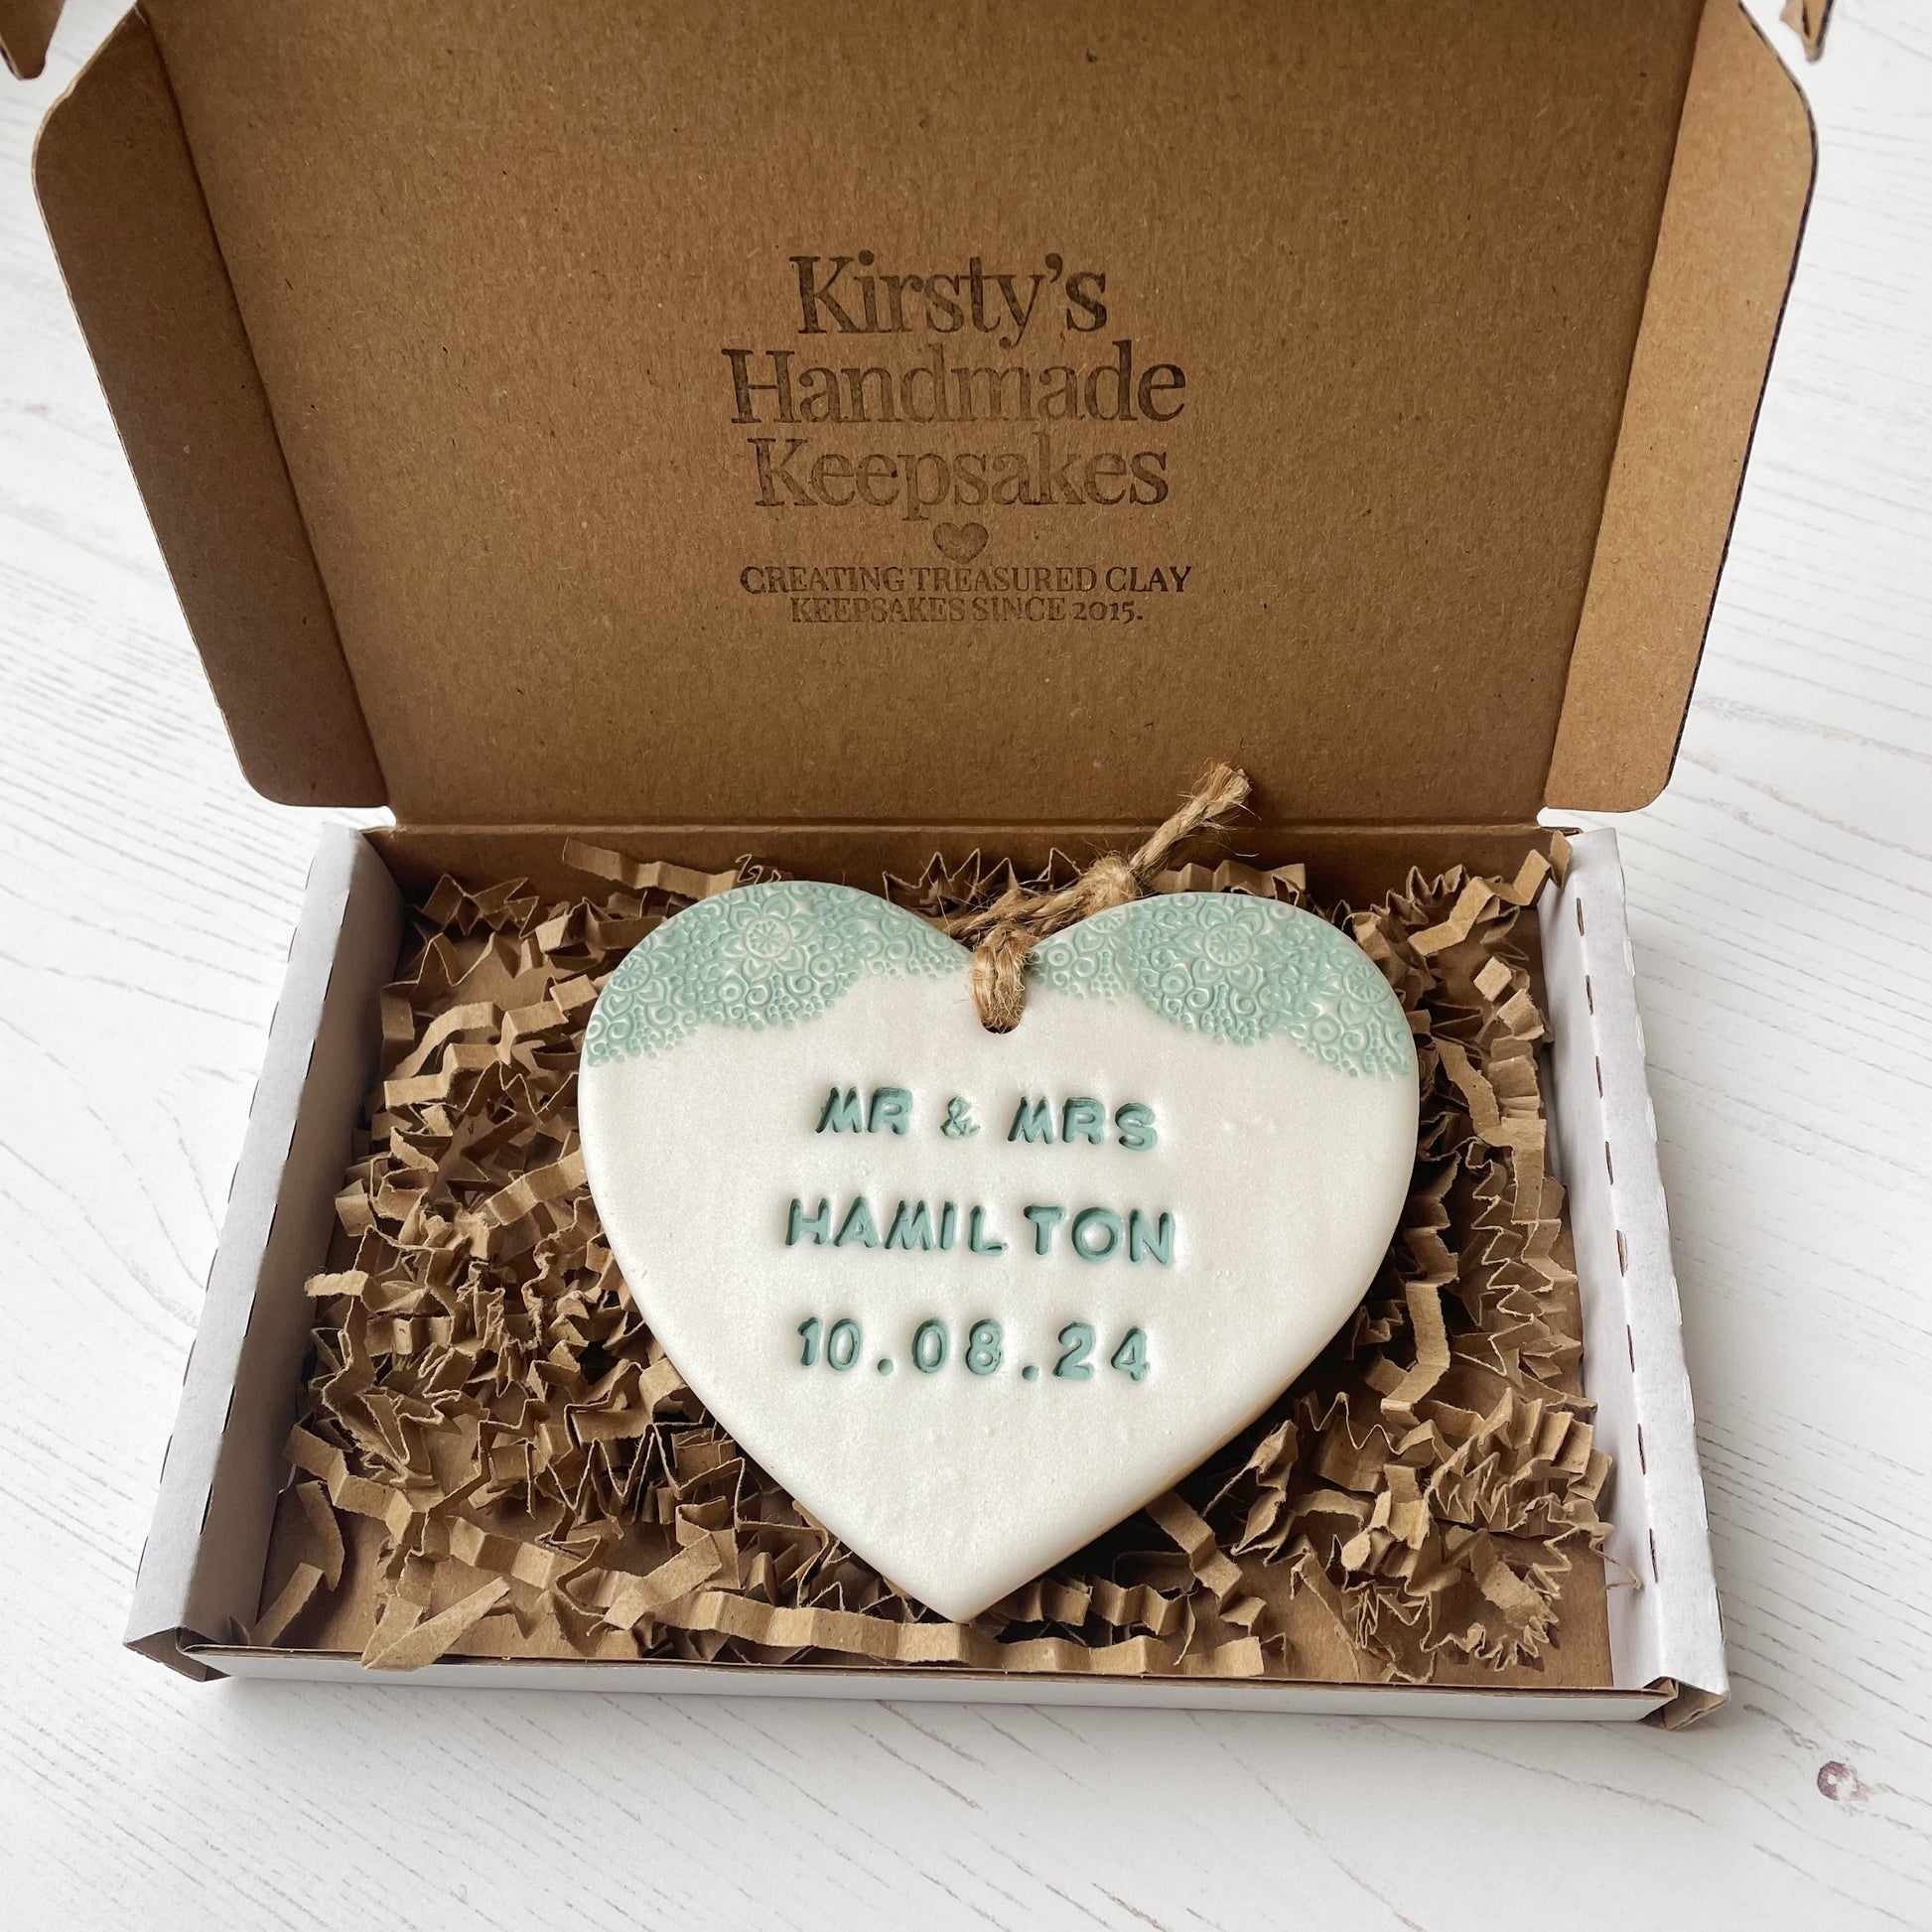 Personalised wedding gift, pearlised white clay hanging heart with a sage green lace edge at the top of the heart, the heart is personalised with MR & MRS HAMILTON 10.08.24